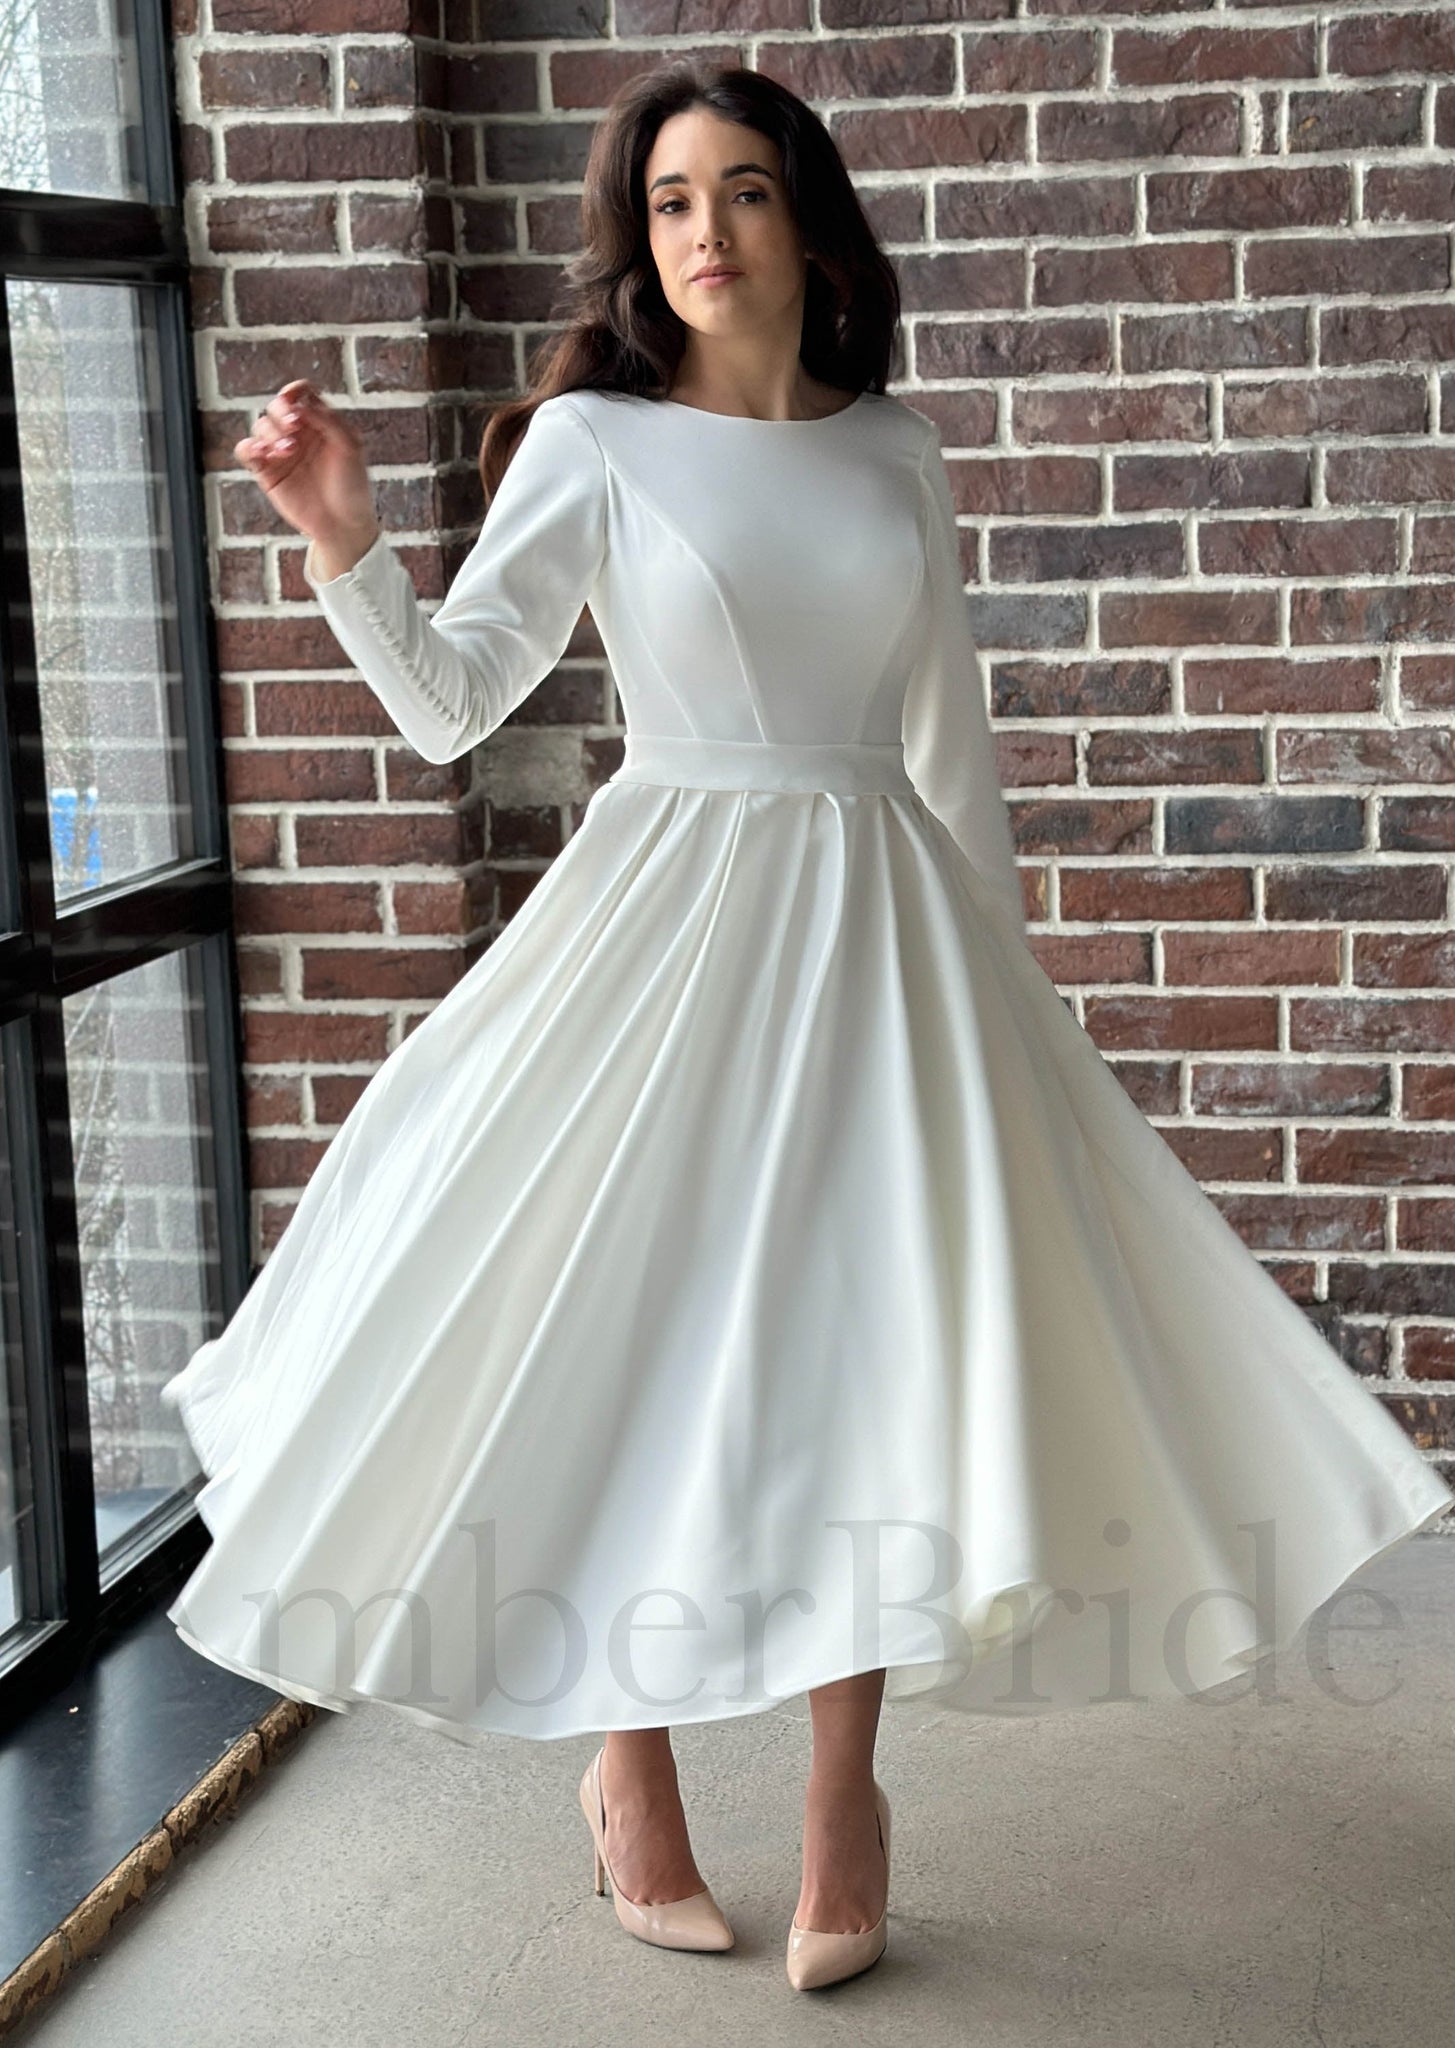 Sophisticated Satin A-Line Tea Length Dress with Half Sleeves and